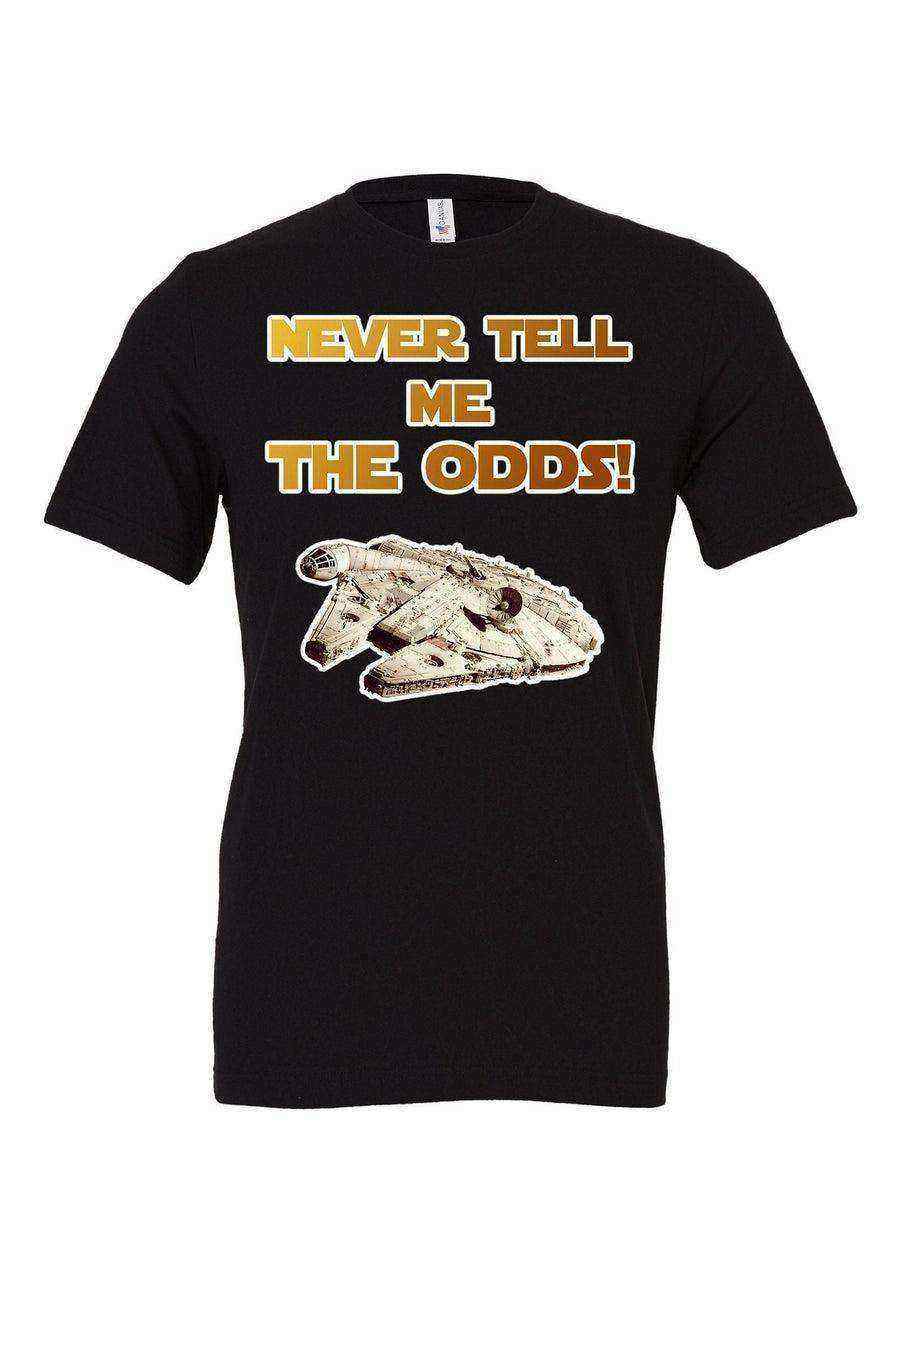 Youth | Star Wars Han Solo Tee | Never Tell Me The Odds - Dylan's Tees